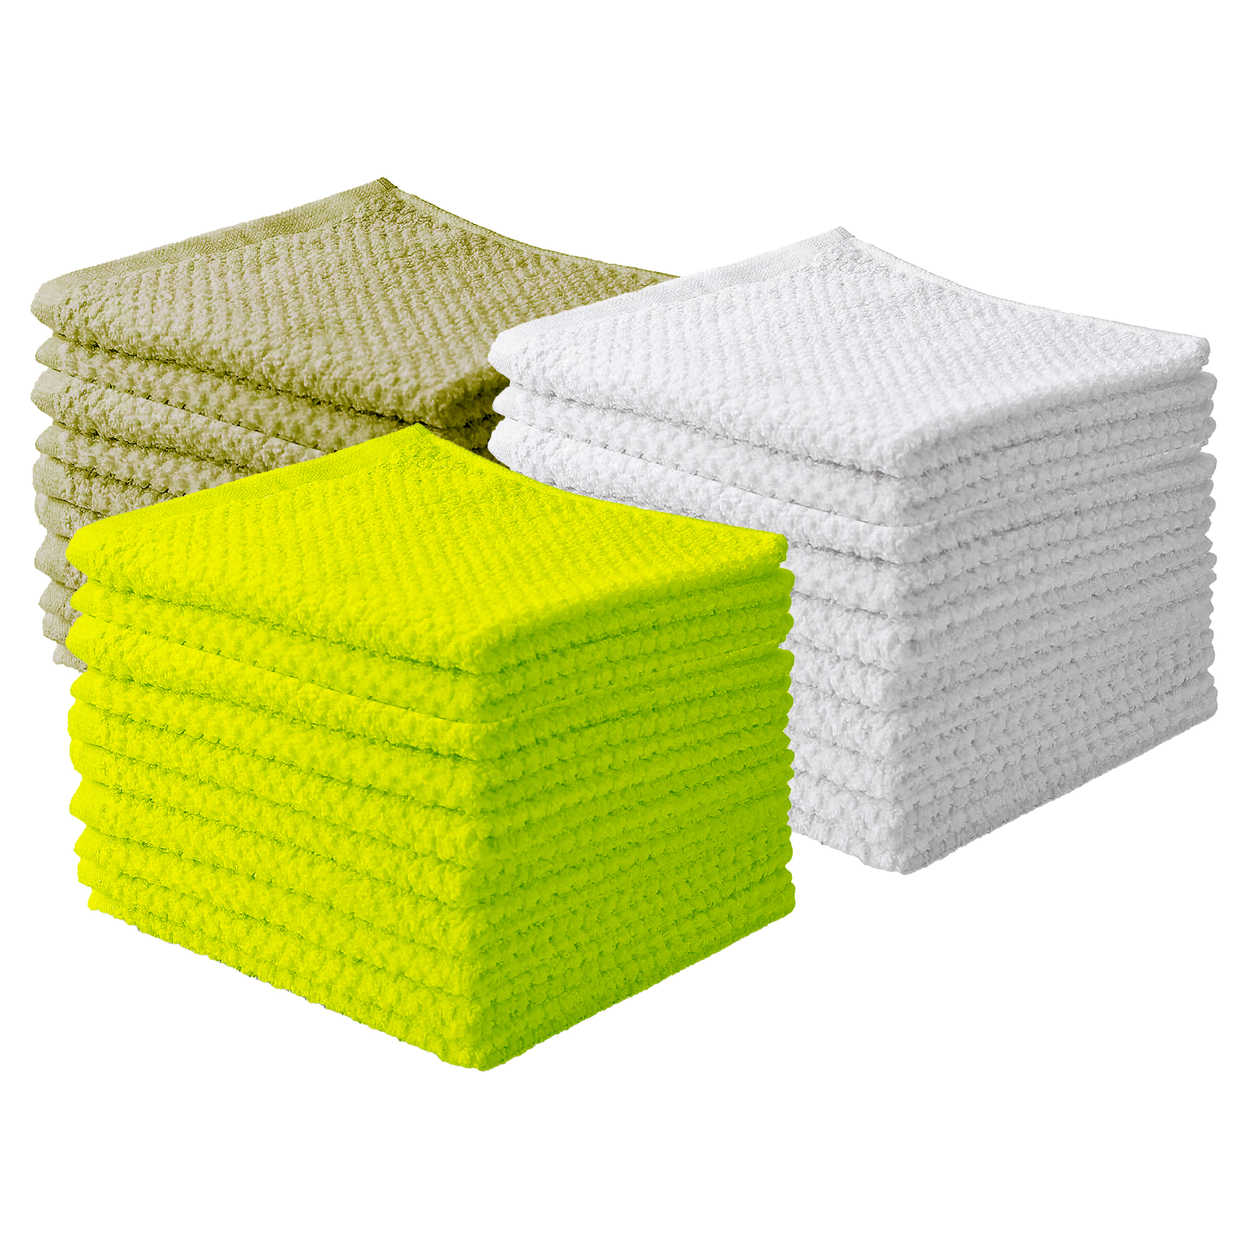 10-Pack: Multipurpose Super Absorbent Ultra Soft 100% Cotton Ring Spun Stitched Wash Cloths